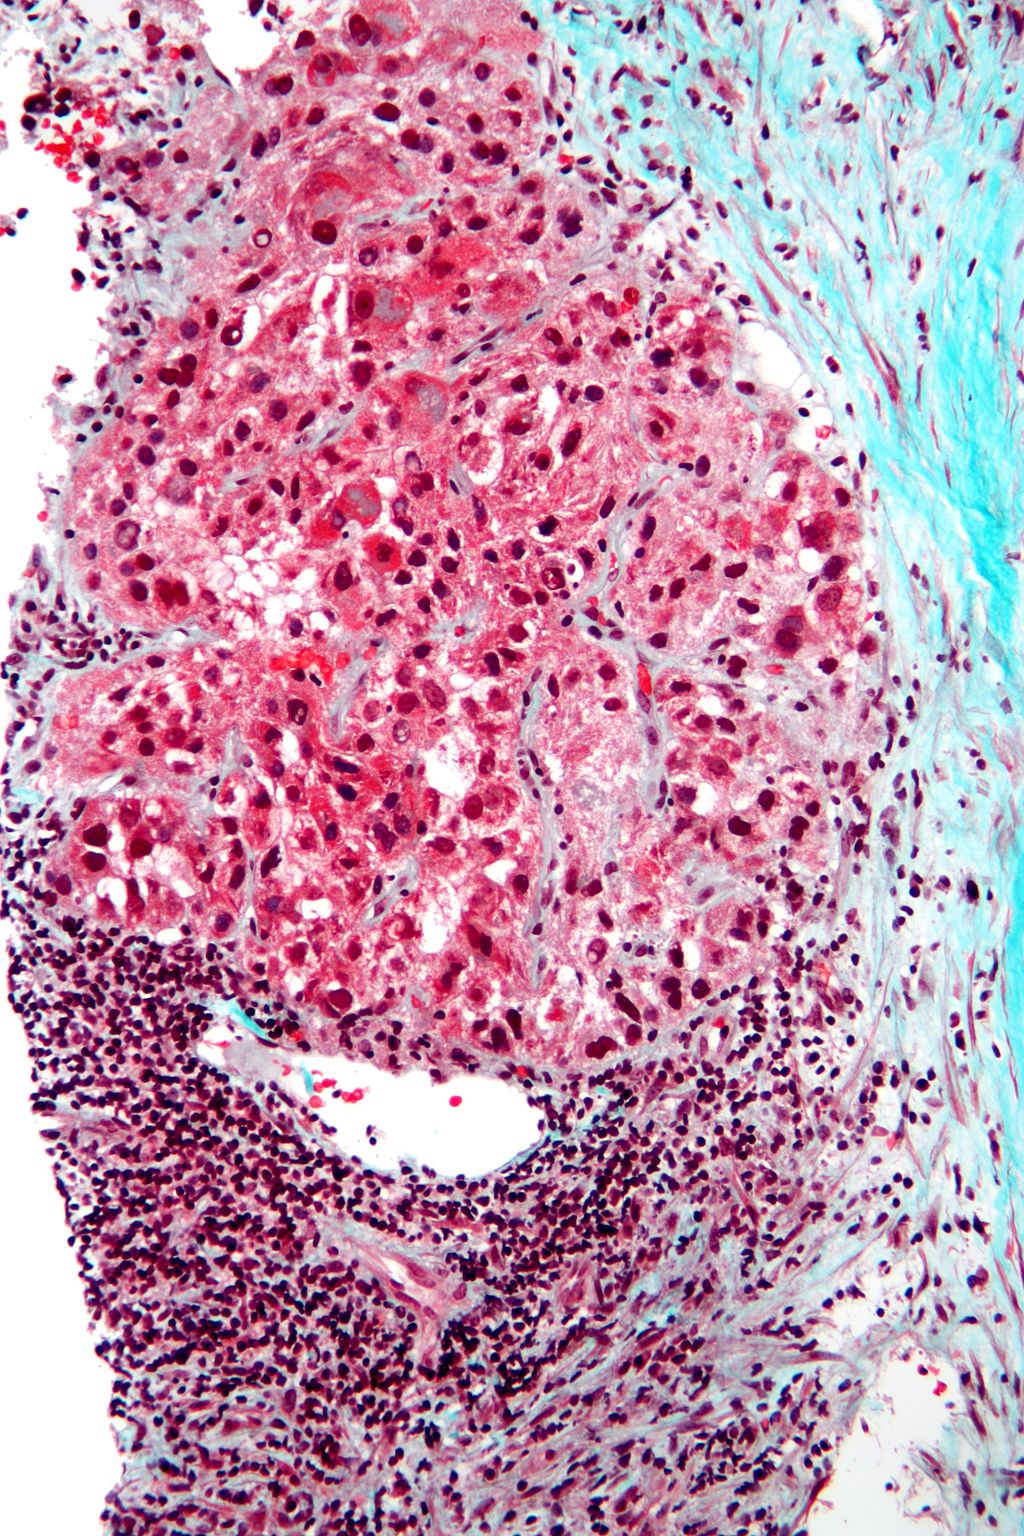 micrograph of liver cancer